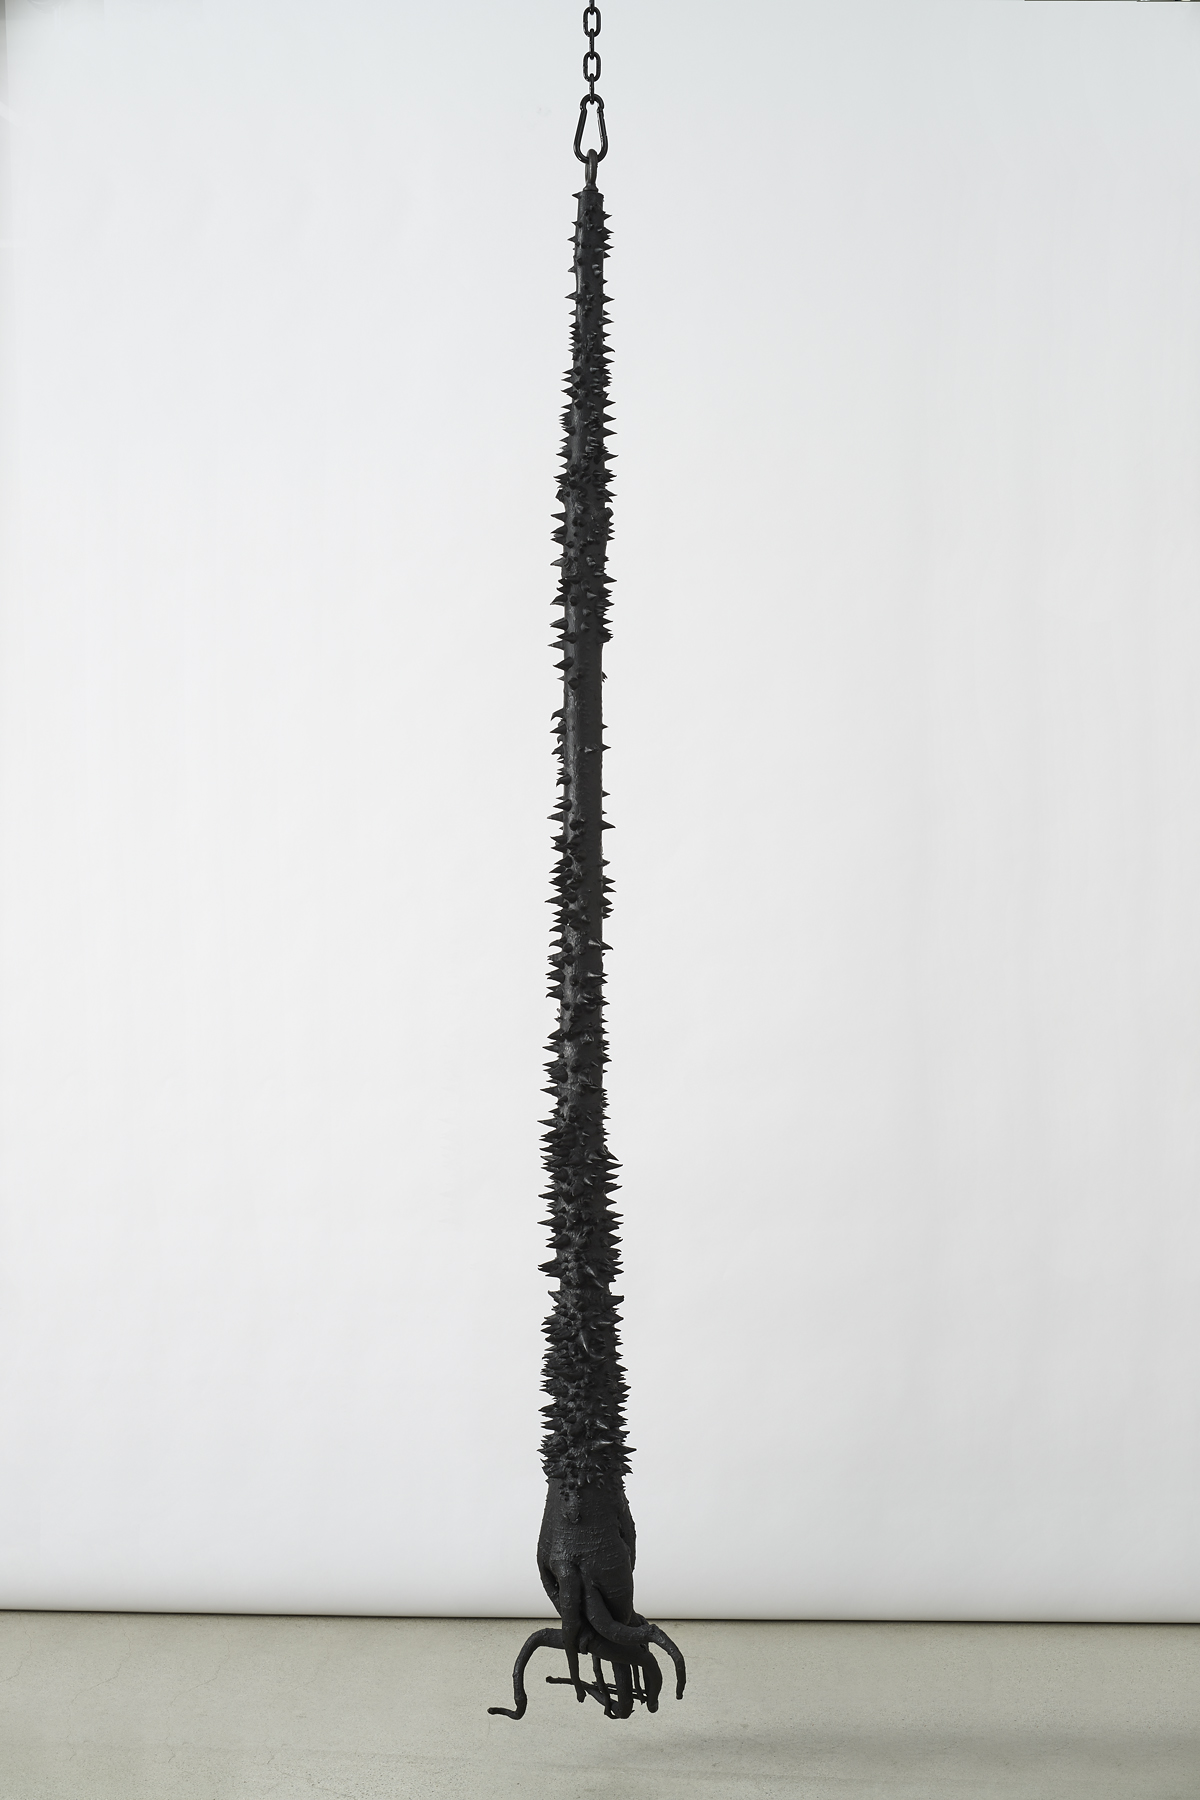  Davina Semo,  Homegrown , 2019, Patinated cast bronze, powder-coated chain, hardware, Trunk: 90 inches / 228.6 cm tall, overall dimensions variable 